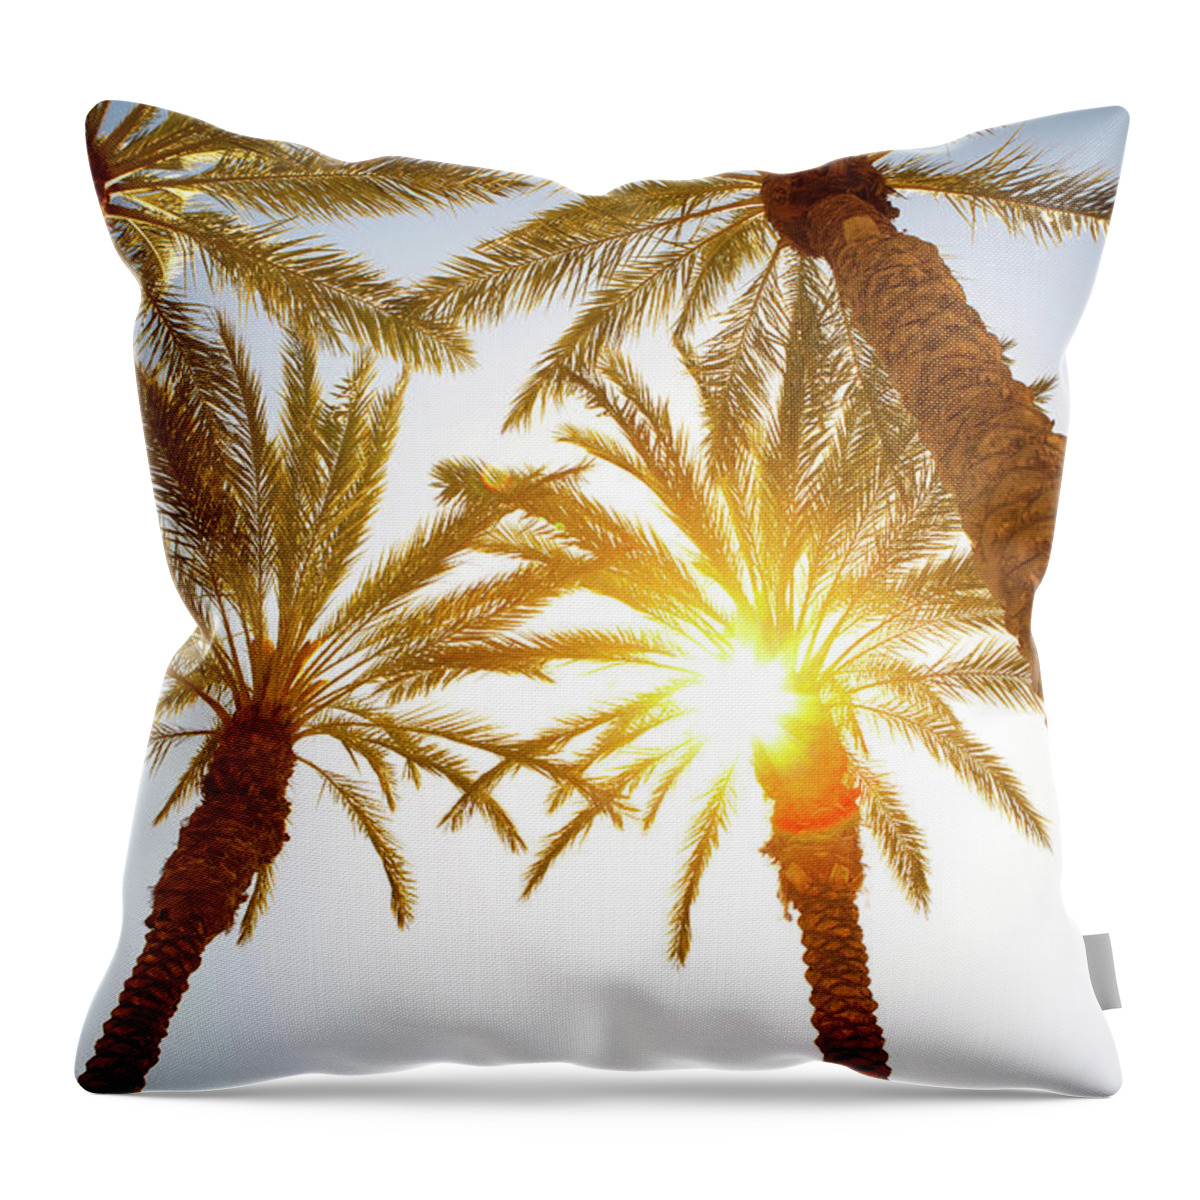 Saturated Color Throw Pillow featuring the photograph Sunbeam Coming Through Palm Tree Leaves by Pawel.gaul